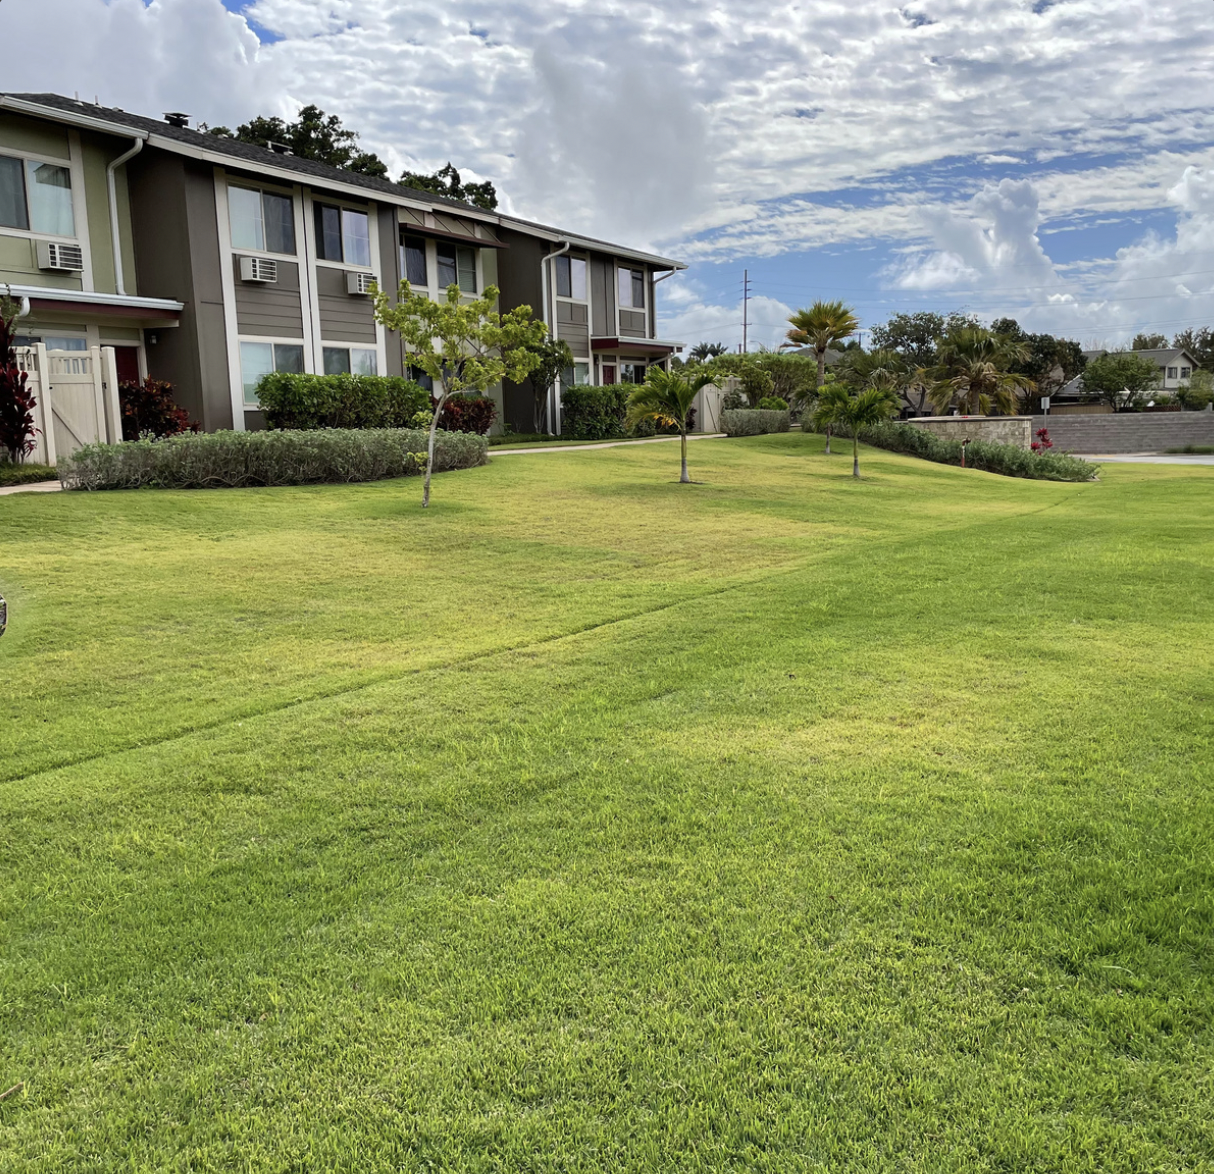 Local property with healthy grass growth